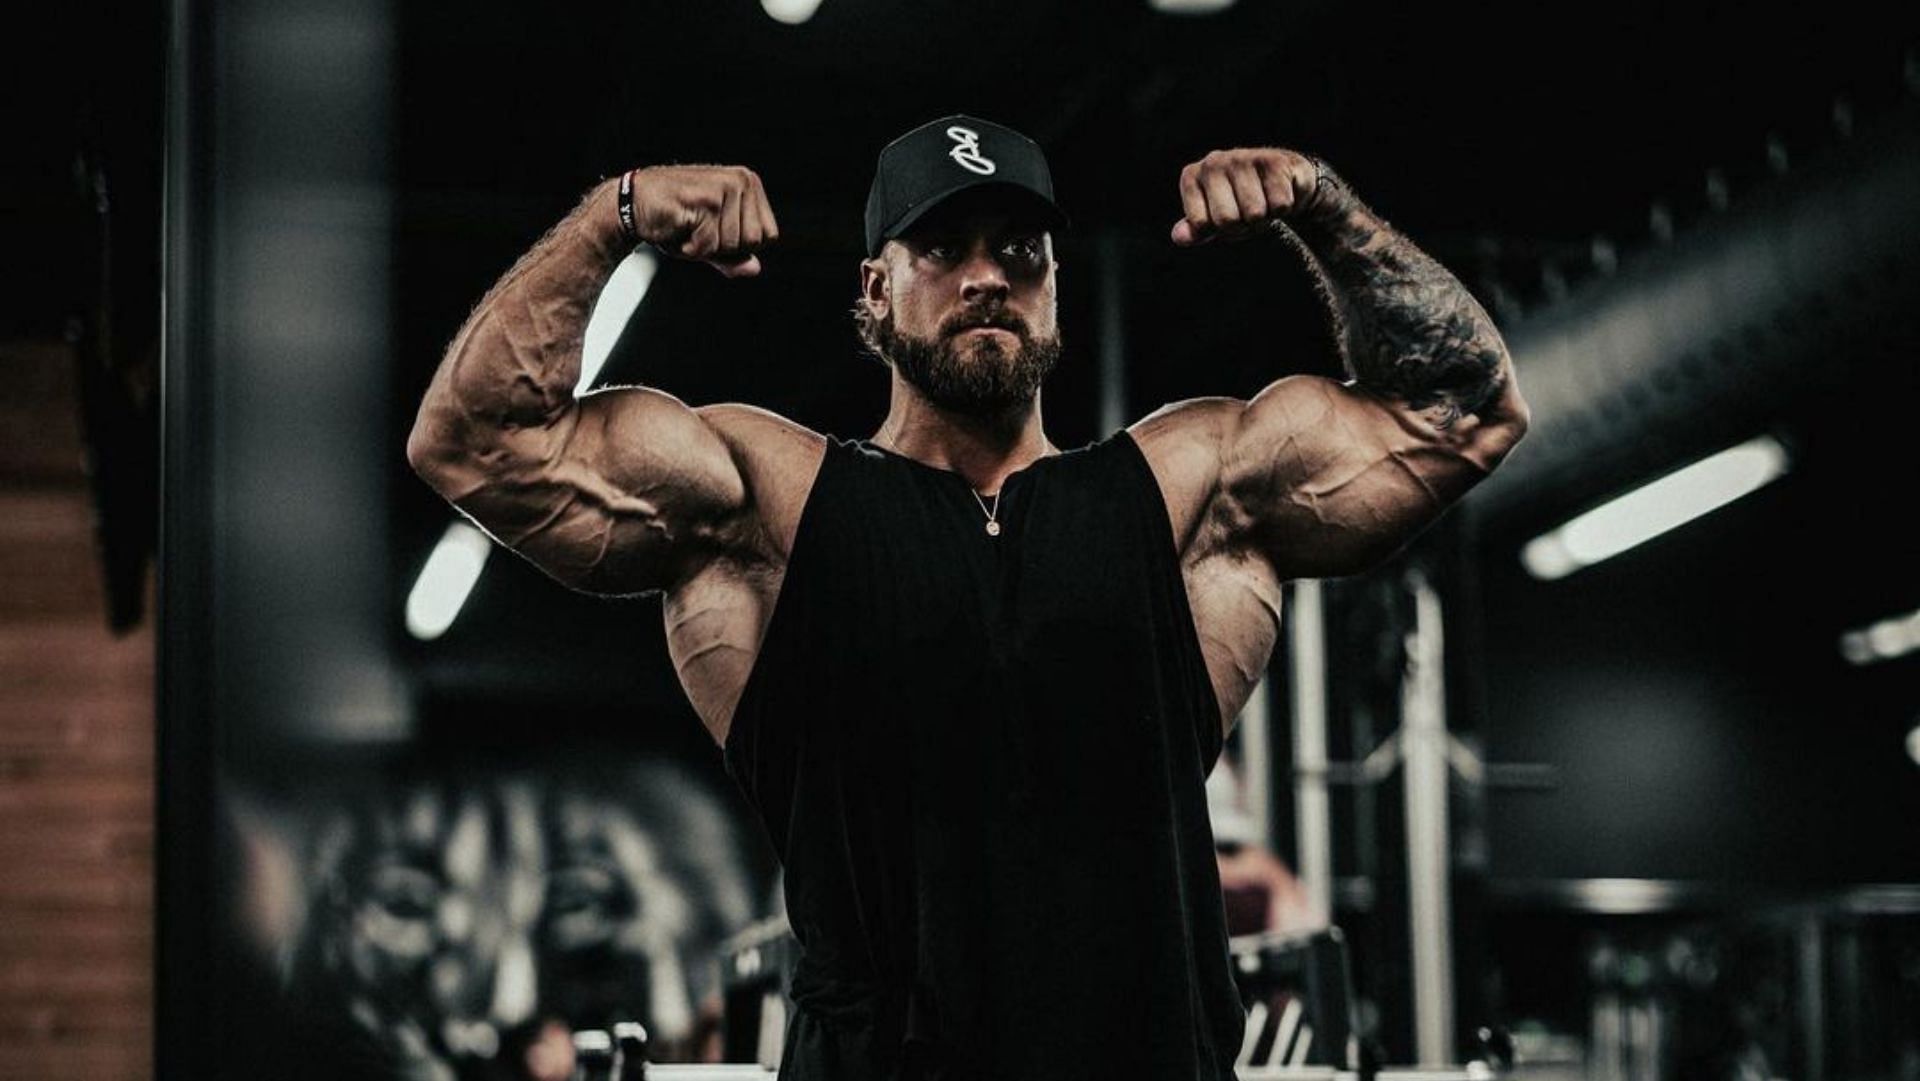 Chris Bumstead: The Man Behind the Millions